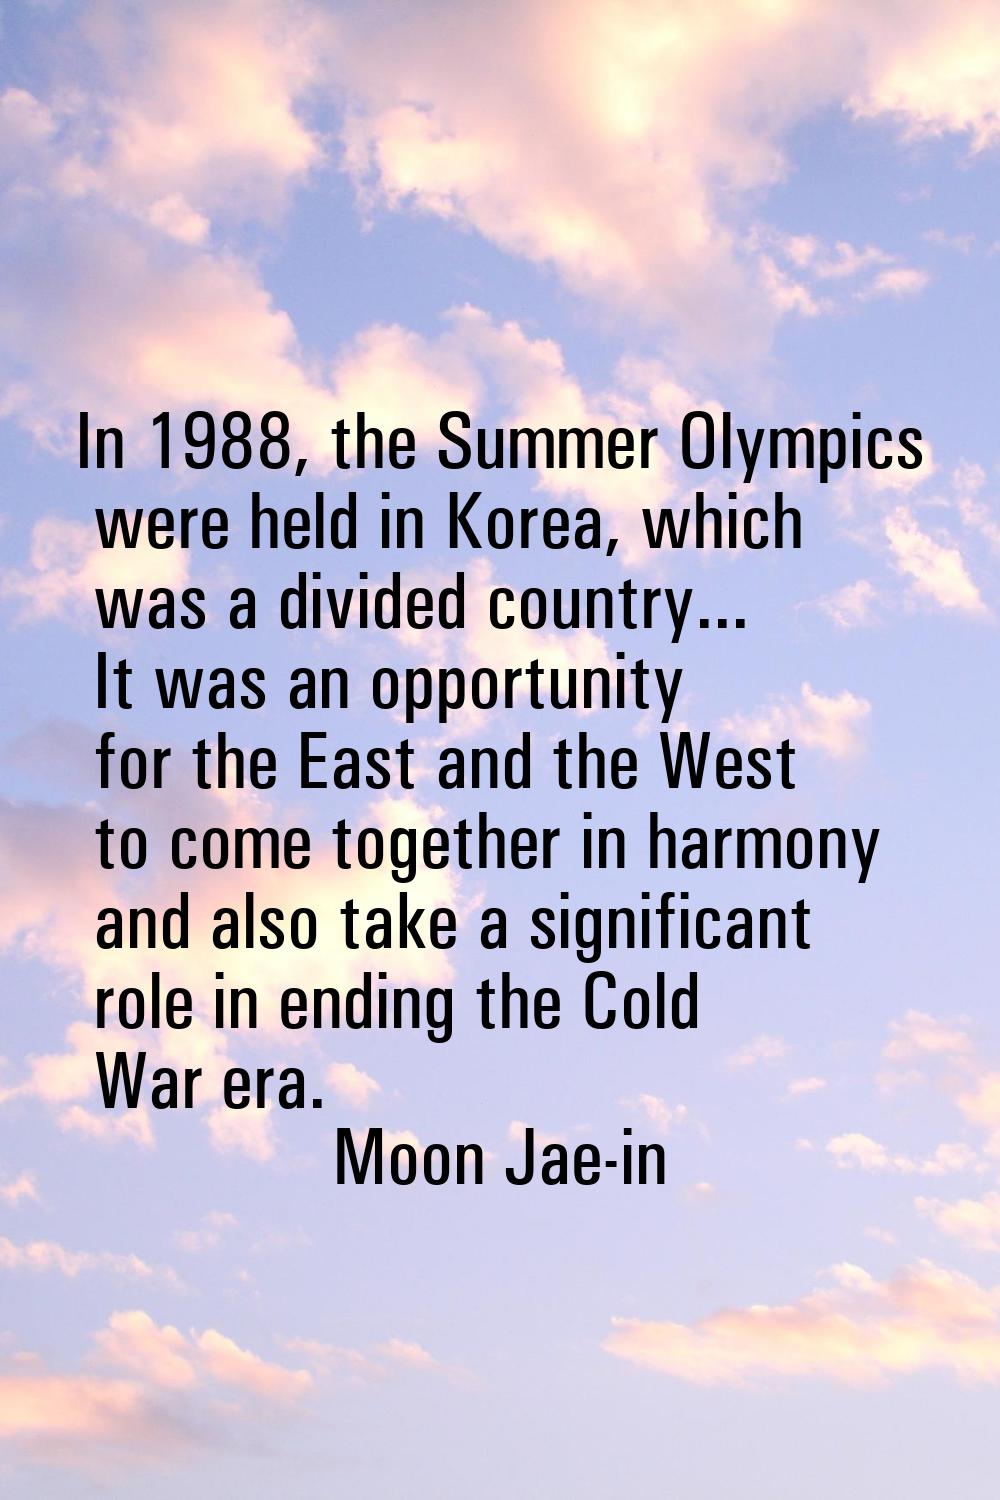 In 1988, the Summer Olympics were held in Korea, which was a divided country... It was an opportuni